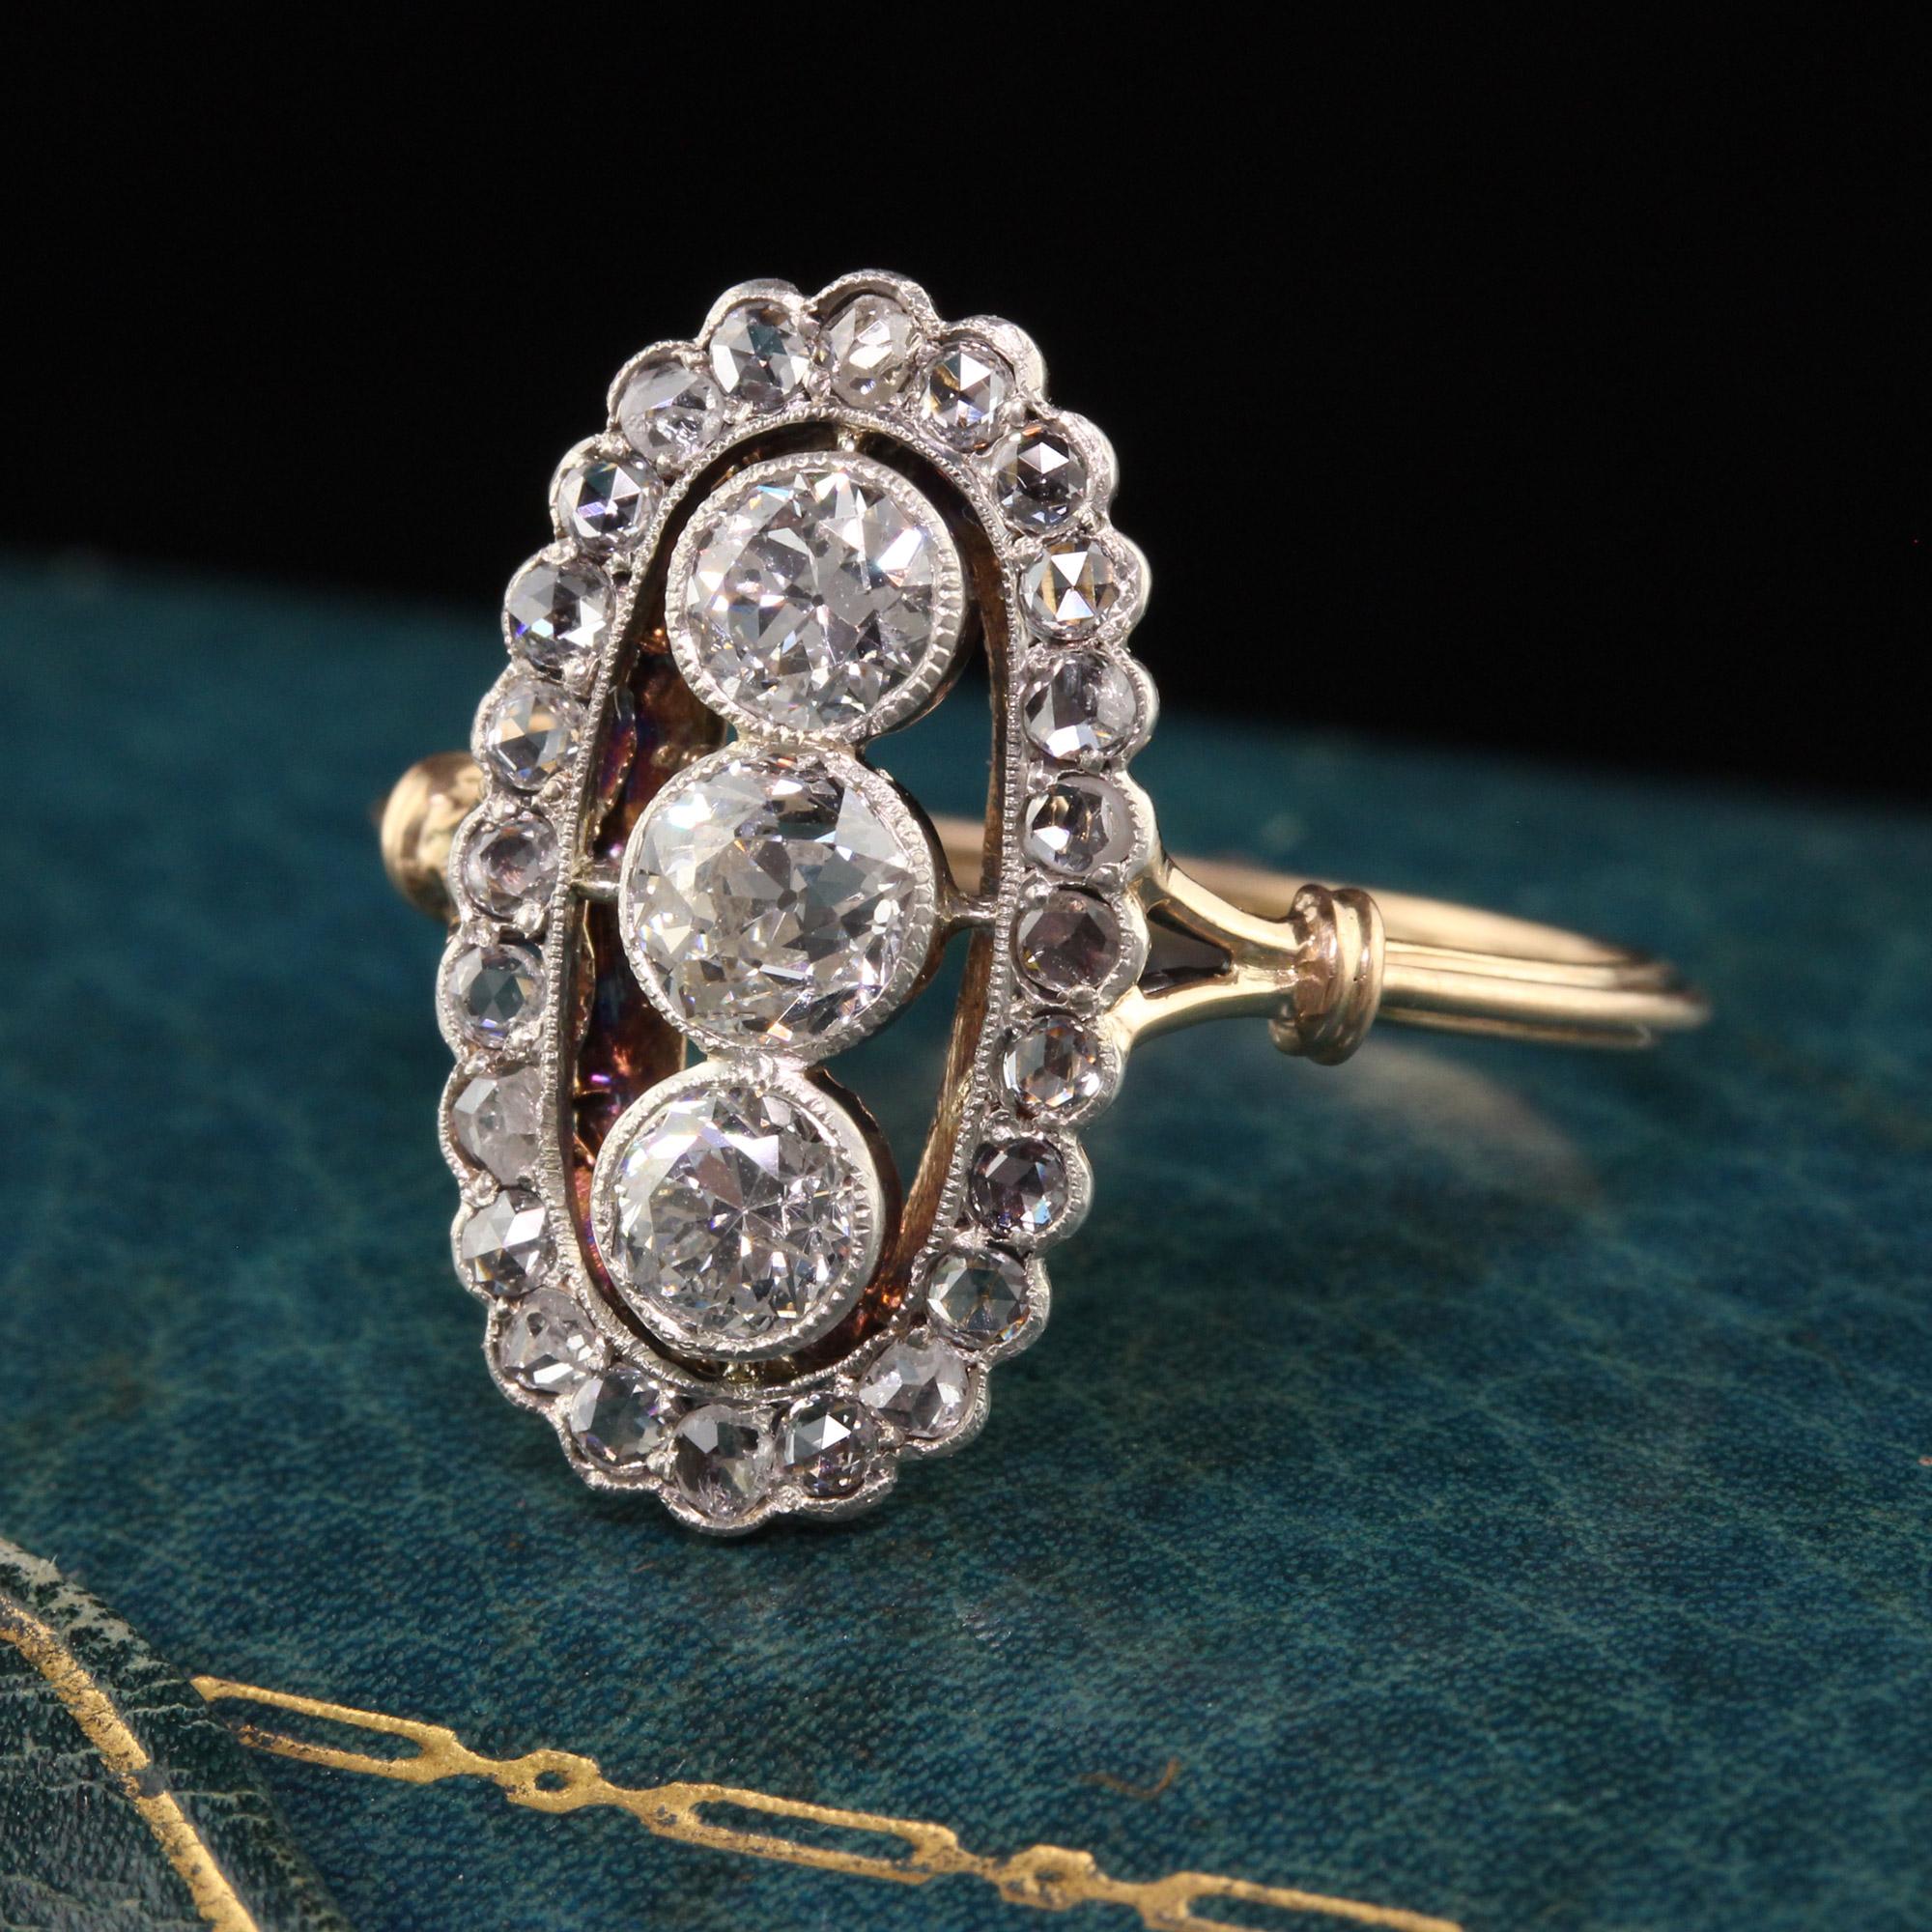 Beautiful Antique Victorian 18K Yellow Gold Old European Rose Cut Diamond Ring. This gorgeous Victorian ring features three beautiful old european cut diamonds in the center and surrounded by rose cut diamonds. It is an amazing piece of